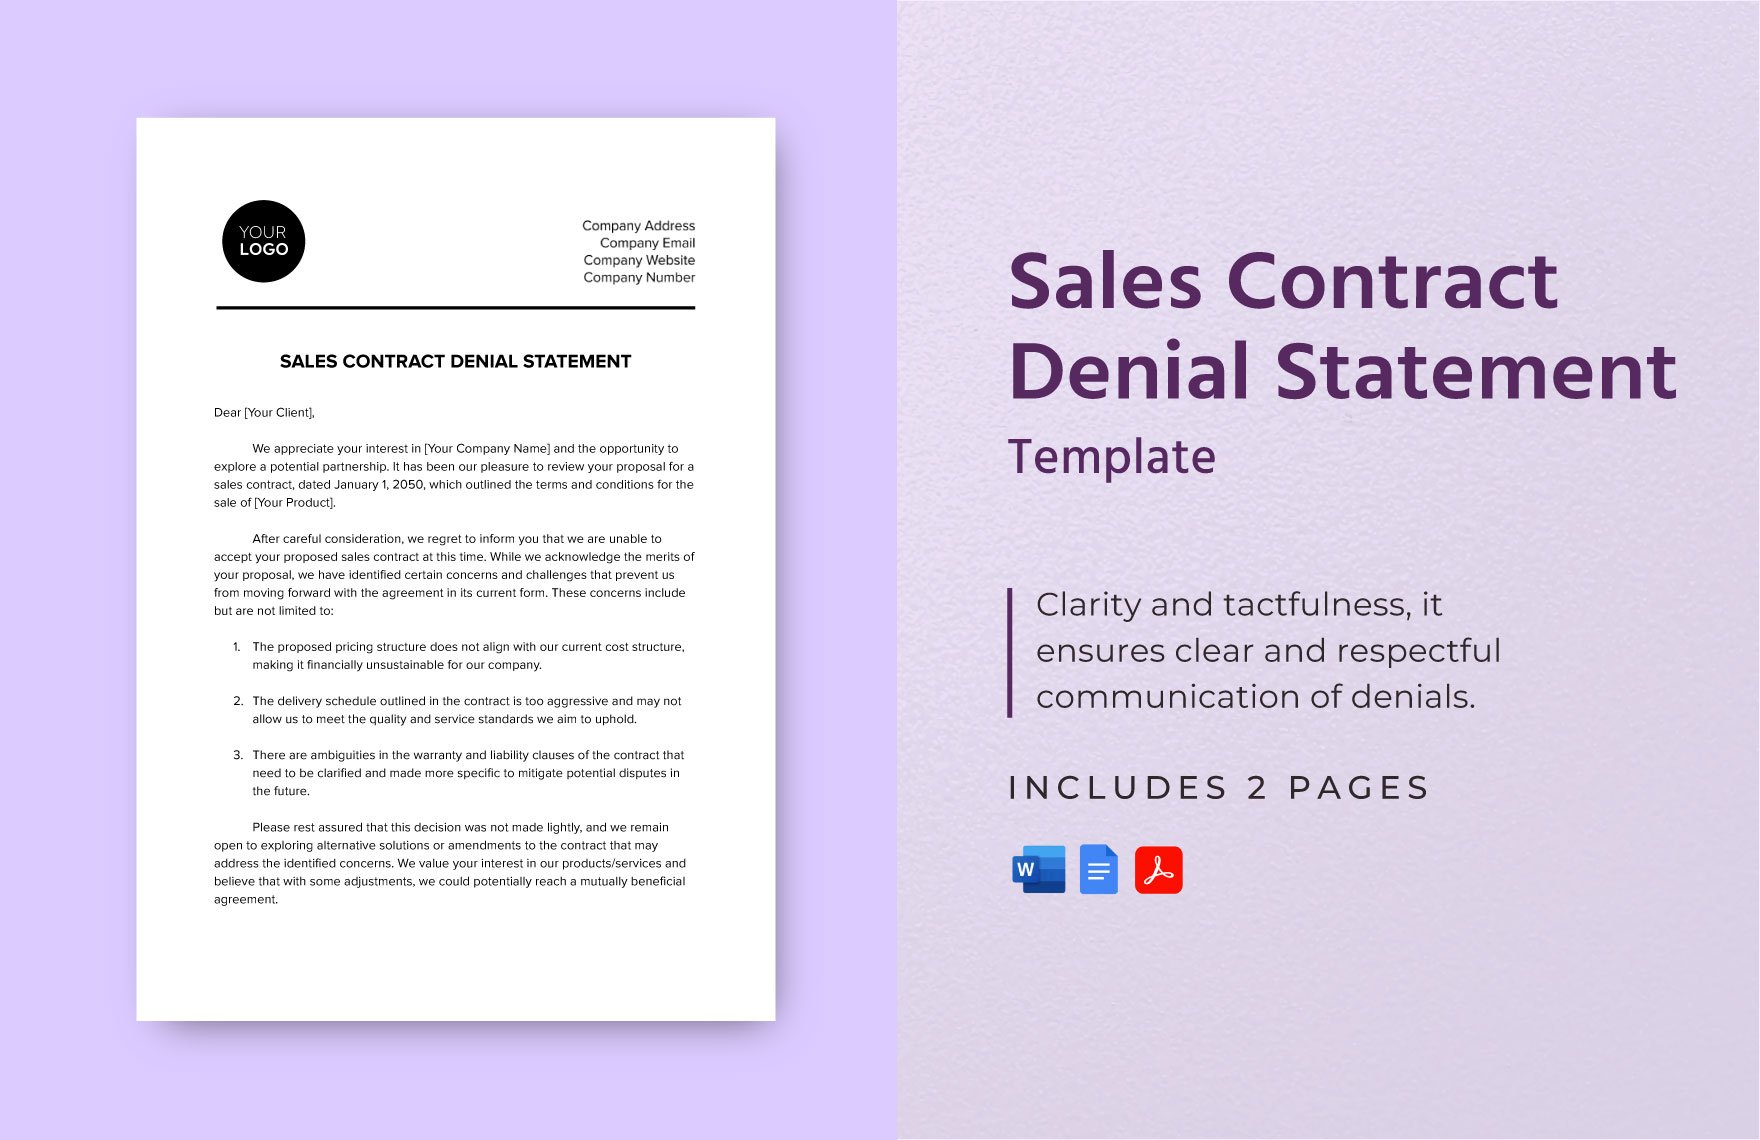 Sales Contract Denial Statement Template in Word, Google Docs, PDF